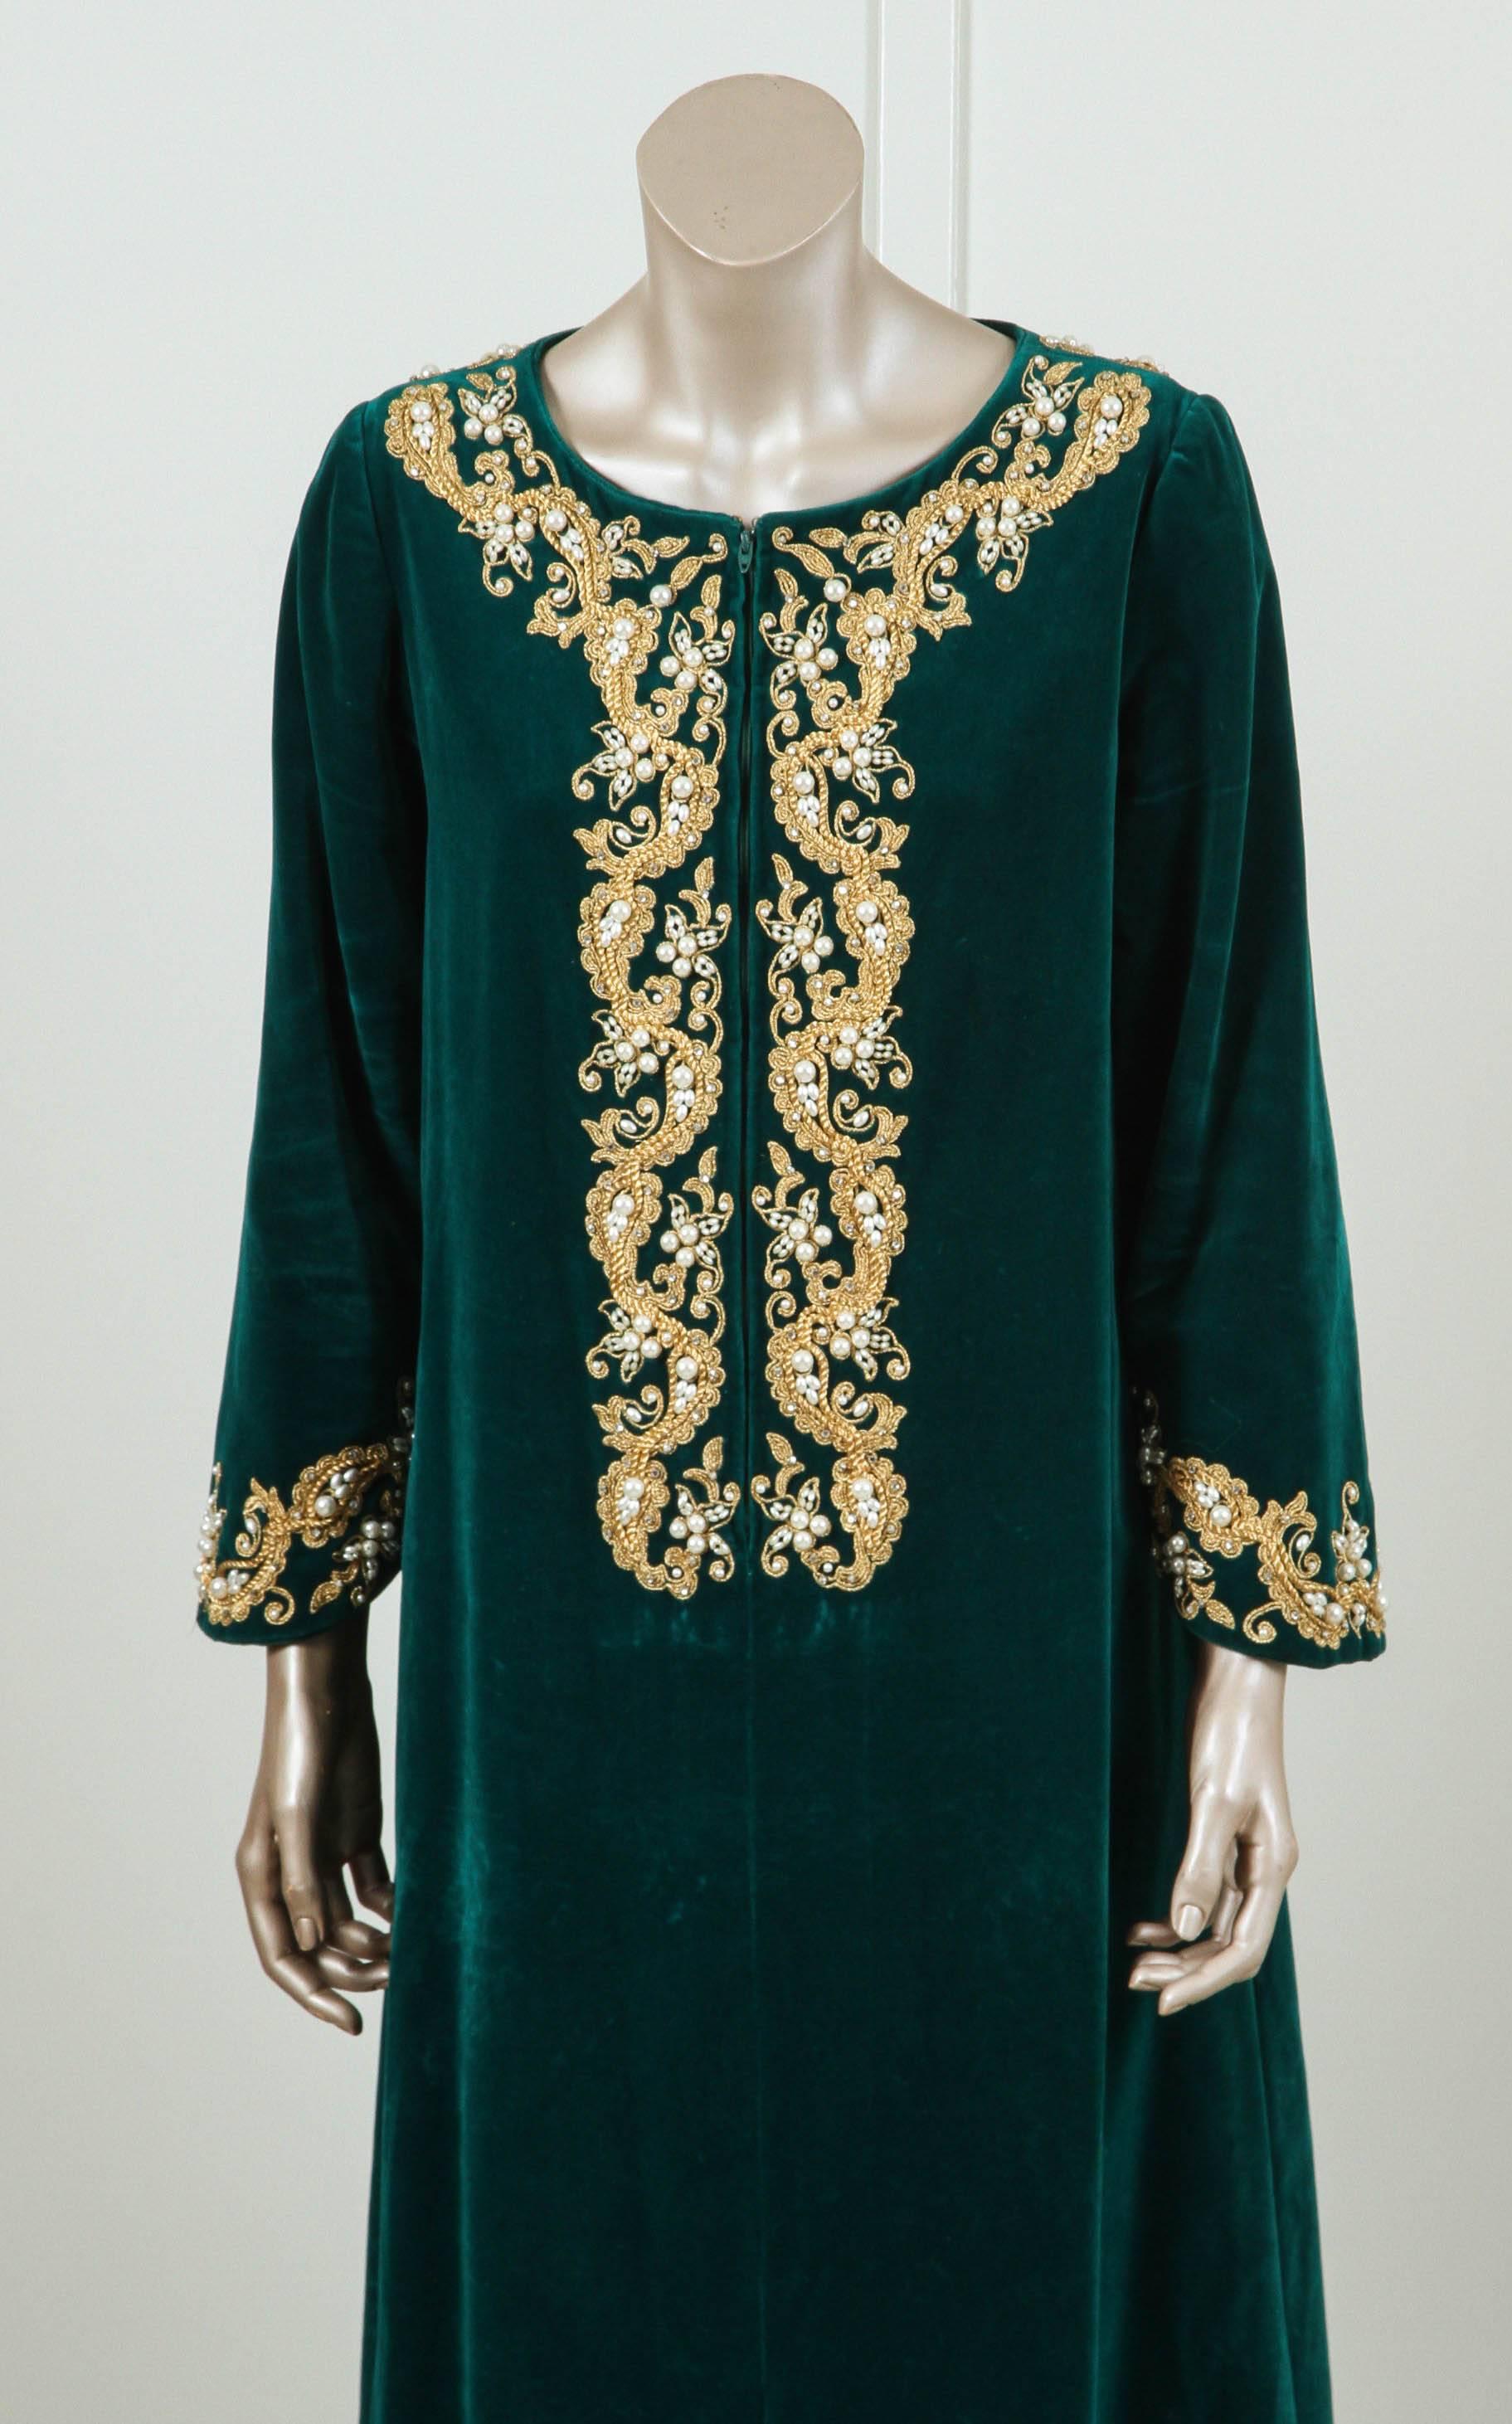 Vintage I. Magnin 1970s silk velvet caftan with embroidered neckline and sleeve embellished and intricately embroidered with pearls and gold threads.
Zipper in front.
This designer dark green color silk velvet Bohemian style kaftan is embroidered